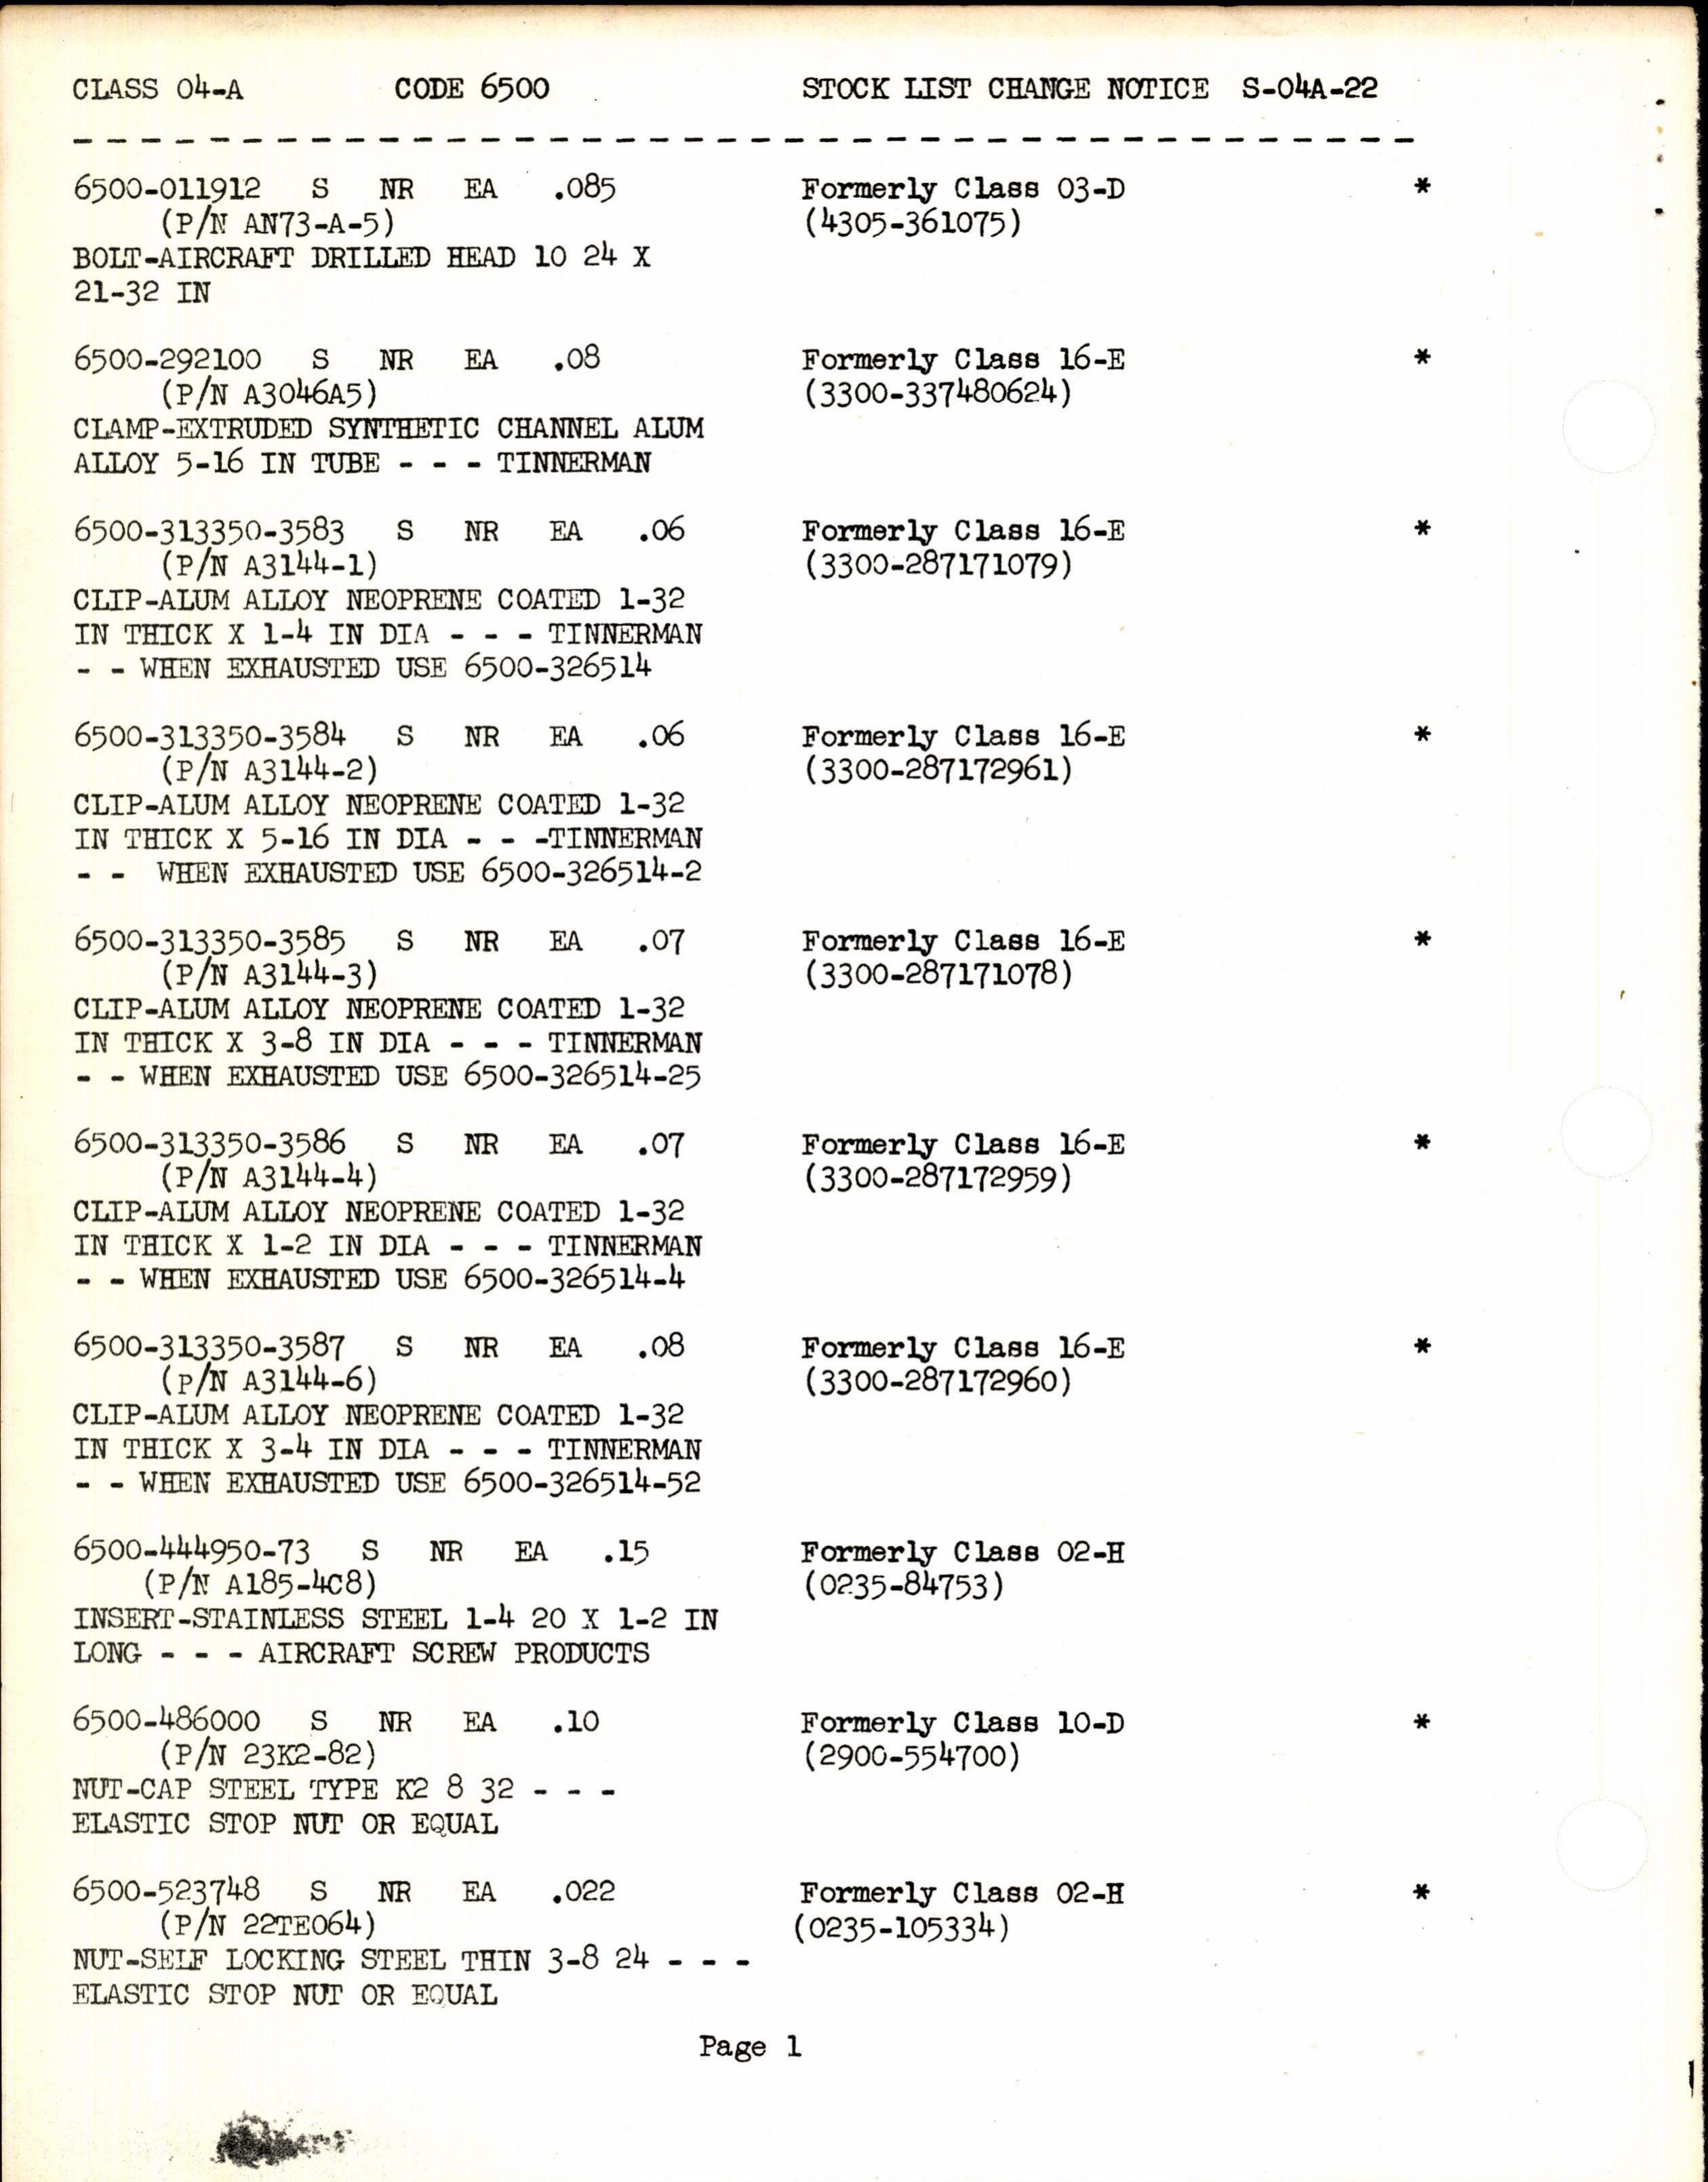 Sample page 2 from AirCorps Library document: Stock List Change Notice - Aircraft Hardware